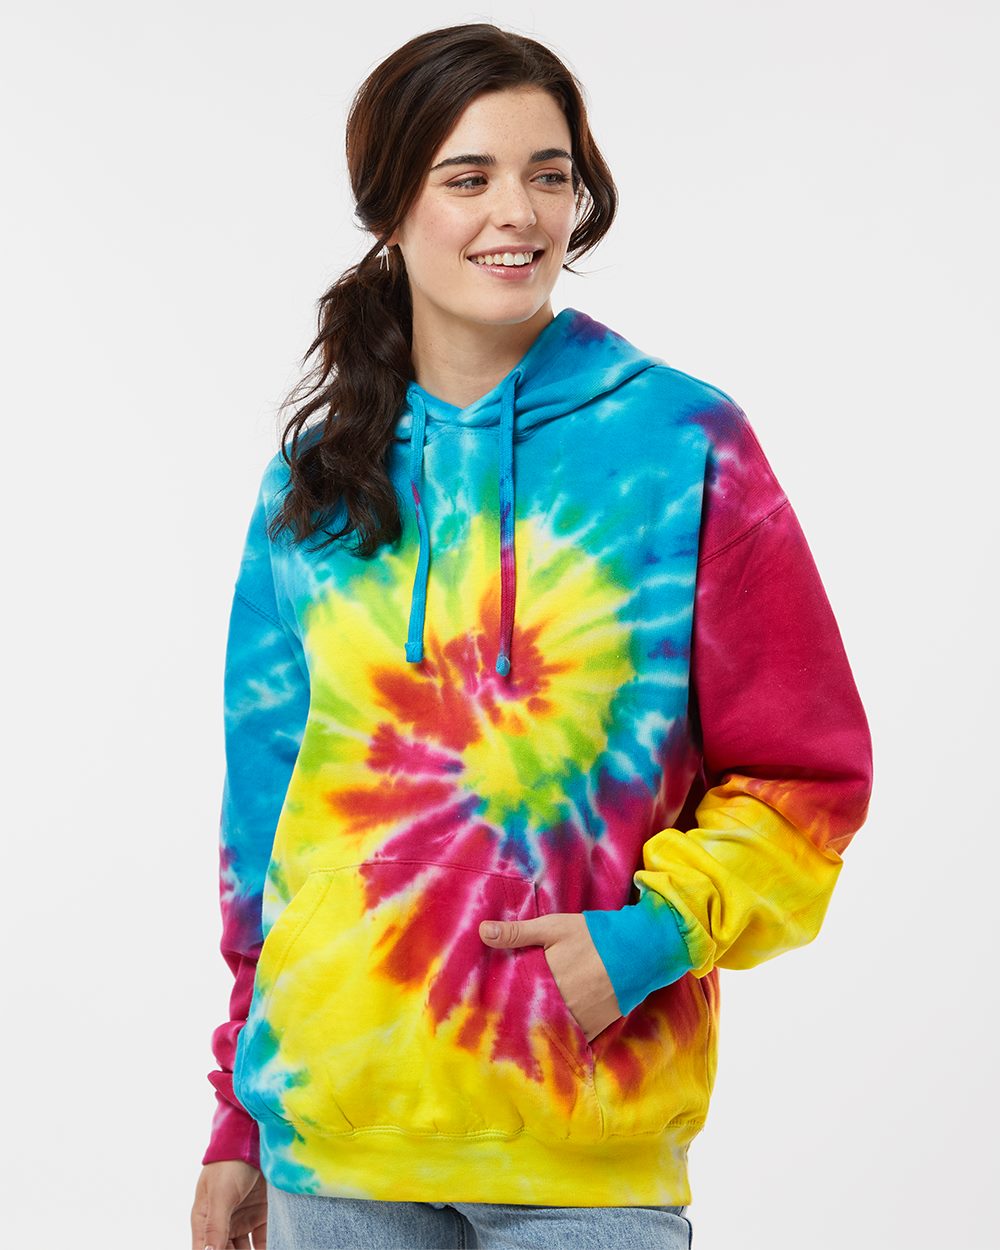 Independent Trading Co. PRM4500TD - Midweight Tie-Dyed Hooded Sweatshirt